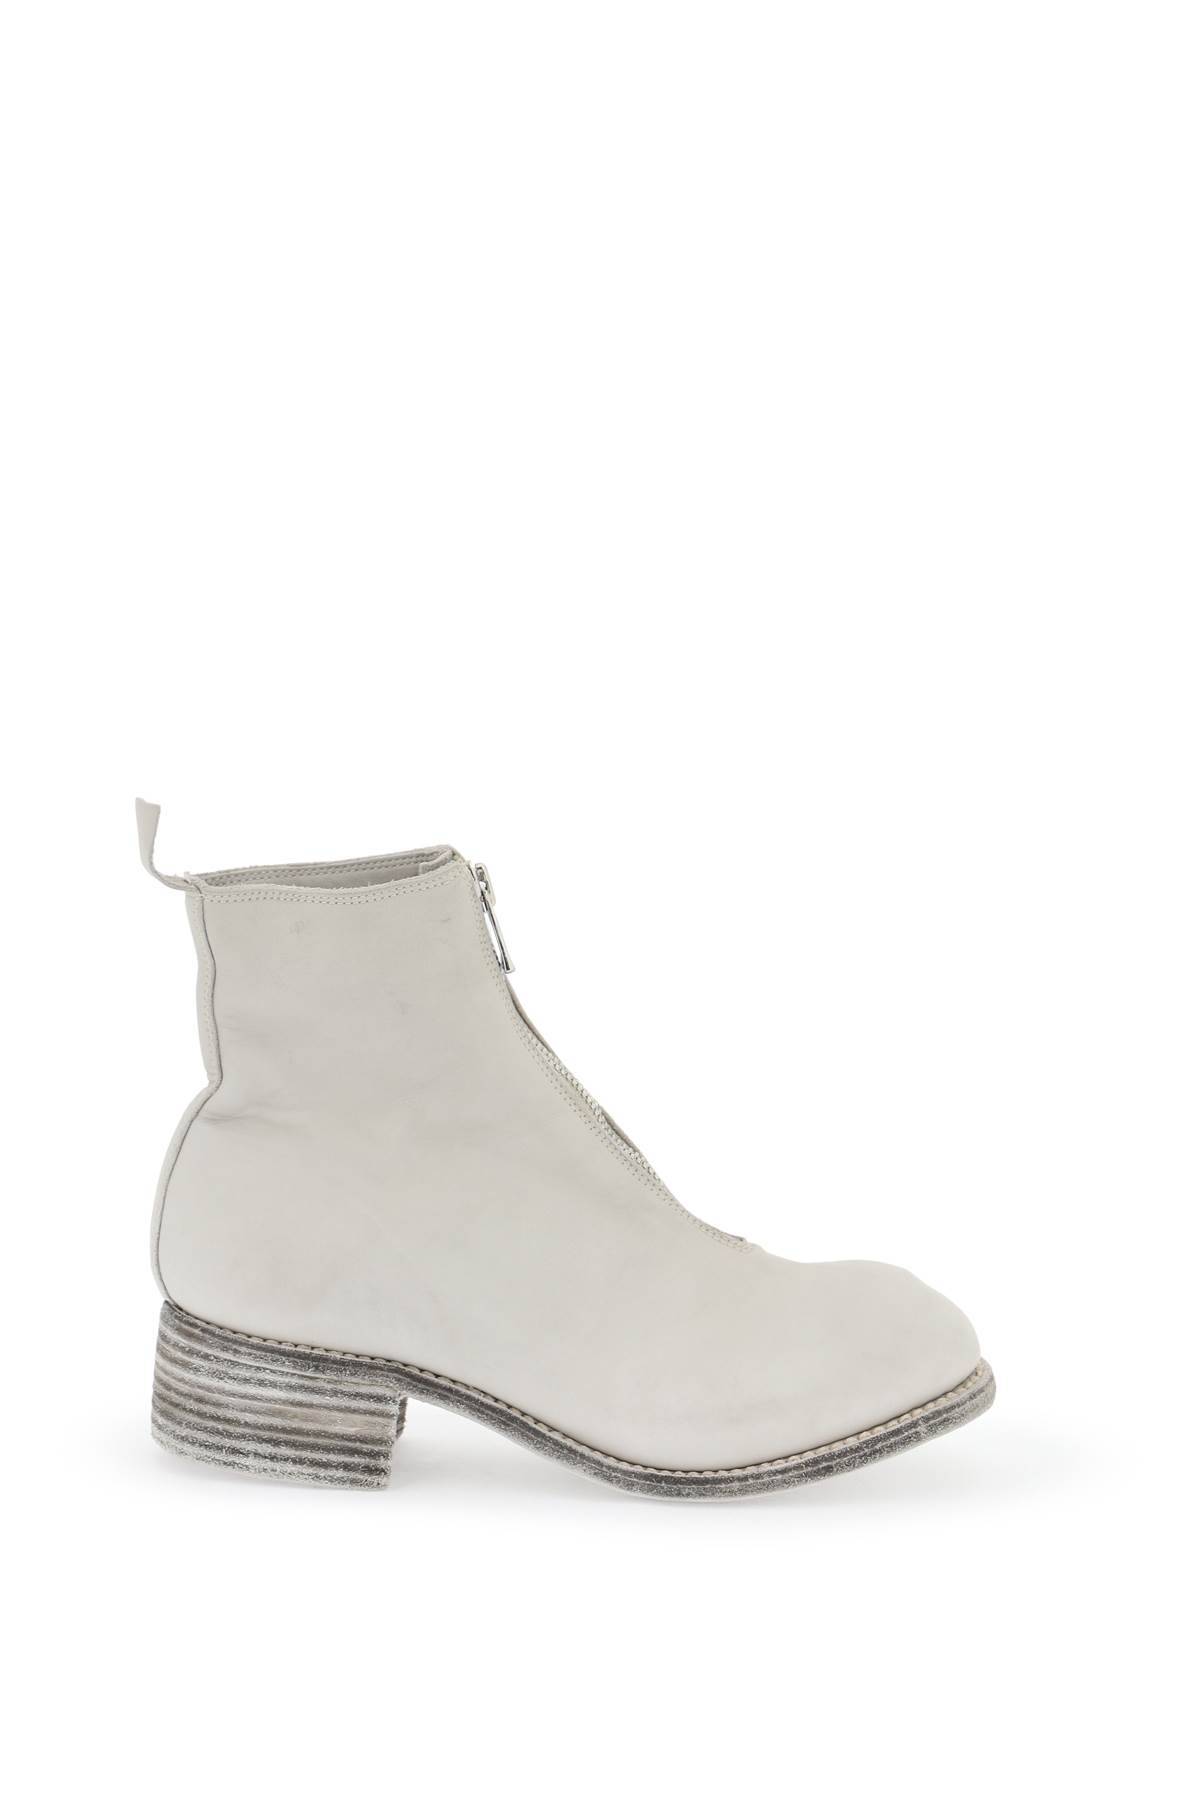 Guidi GUIDI front zip leather ankle boots